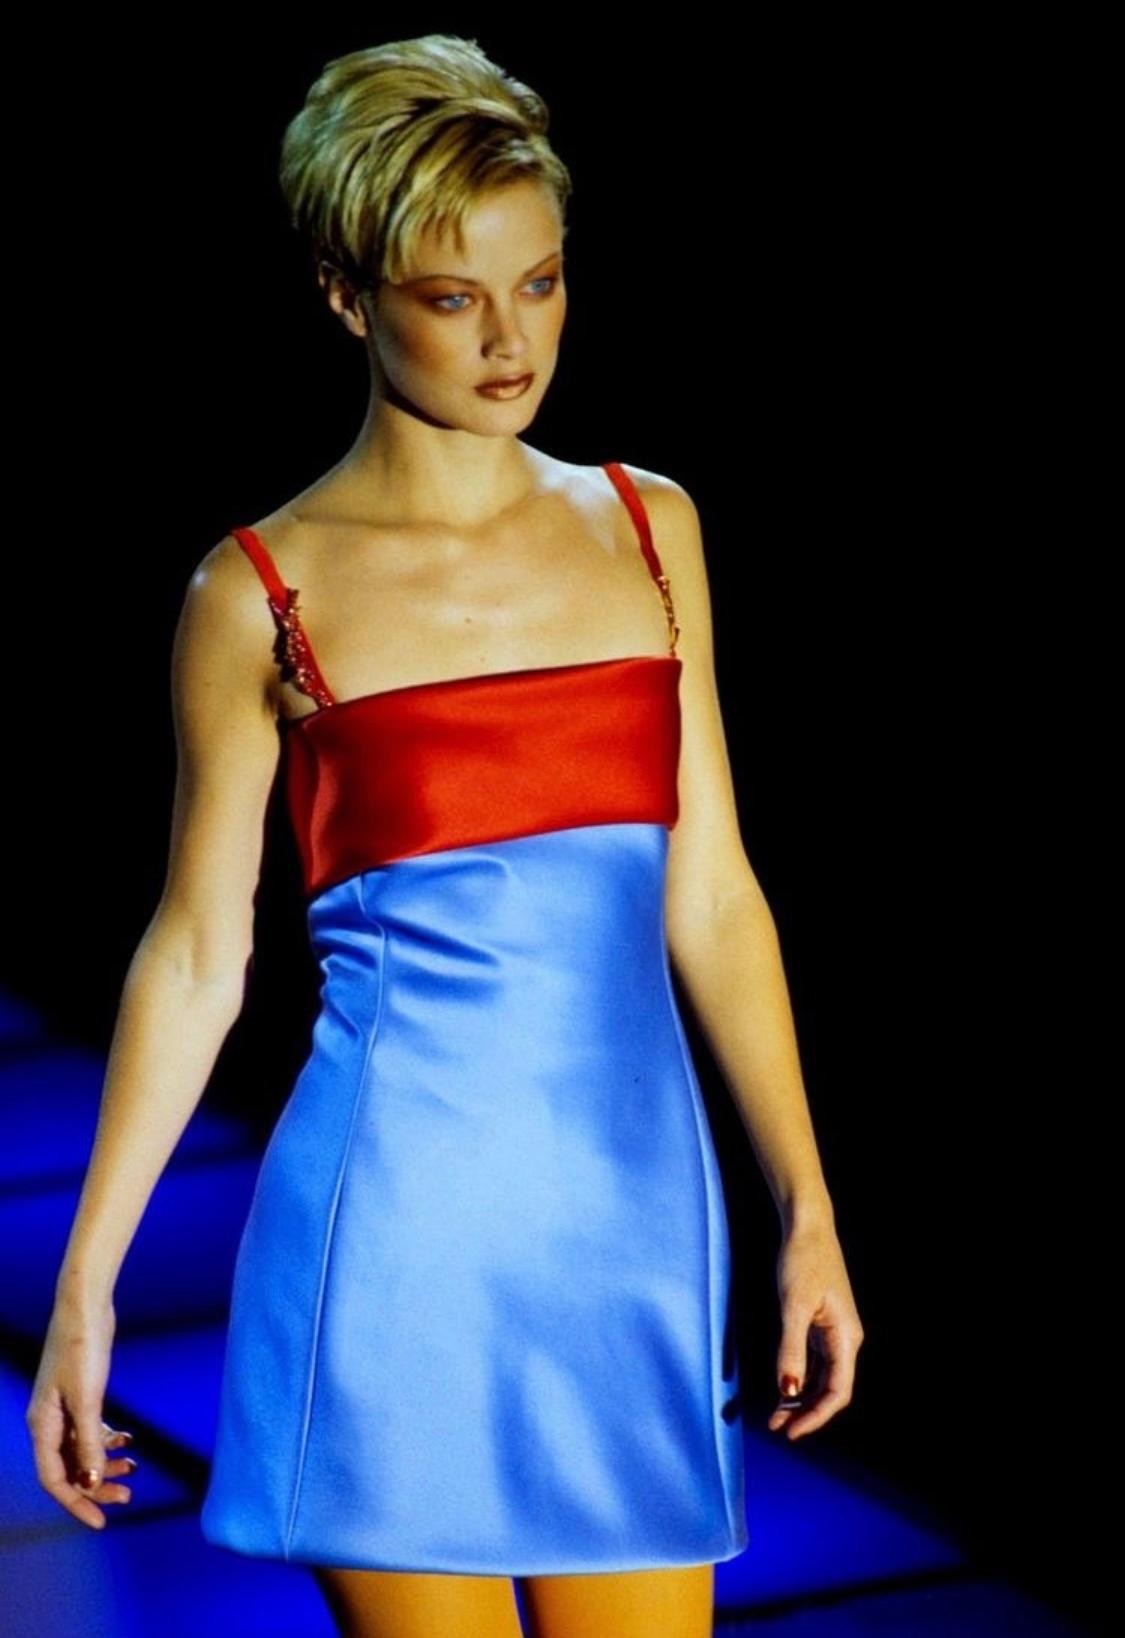 Made of bright blue and red satin, this gorgeous Fall/Winter 1996 mini dress in a color-block pattern was created by Gianni Versace. This look debuted as look 42 on the F/W 1996 runway and was worn by Carolyn Murphy. Diverting from some of Gianni's